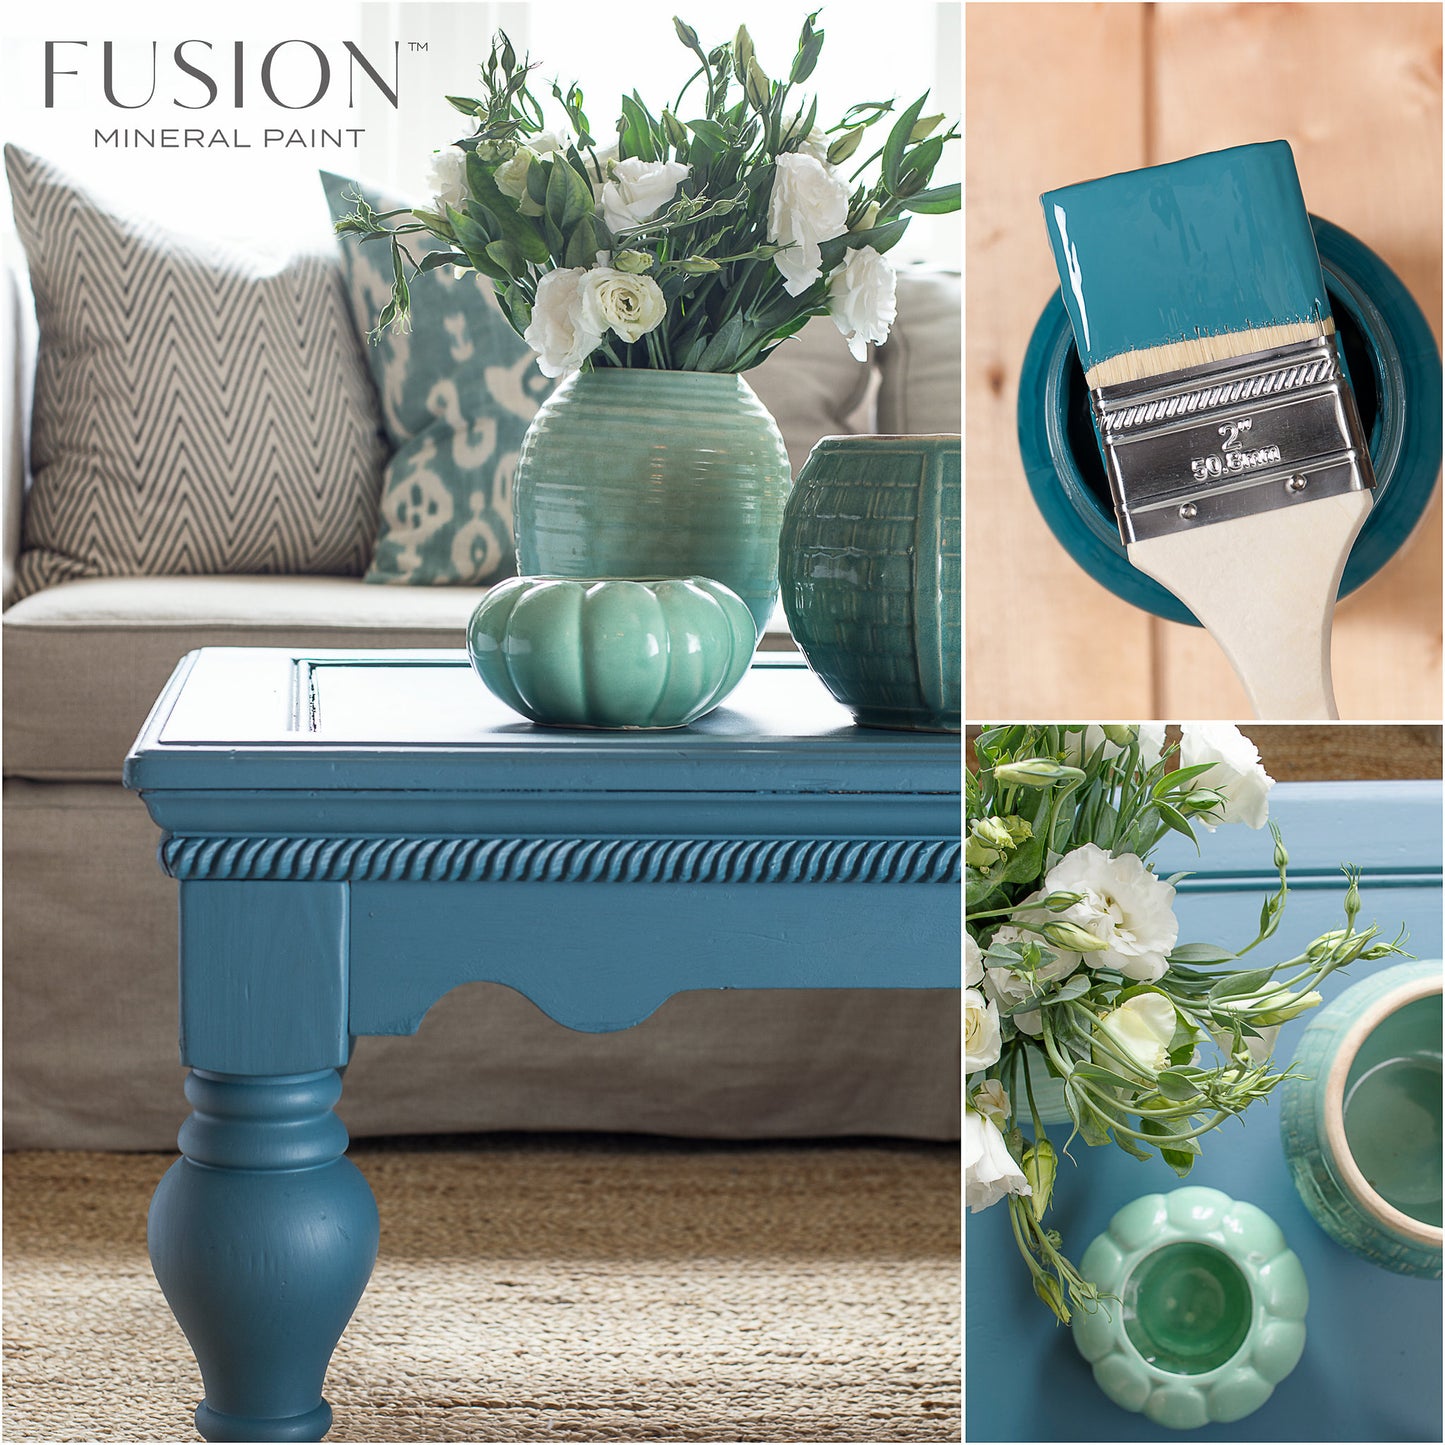 Seaside - Fusion Mineral Paint Paint > Fusion Mineral Paint > Furniture Paint 500ml